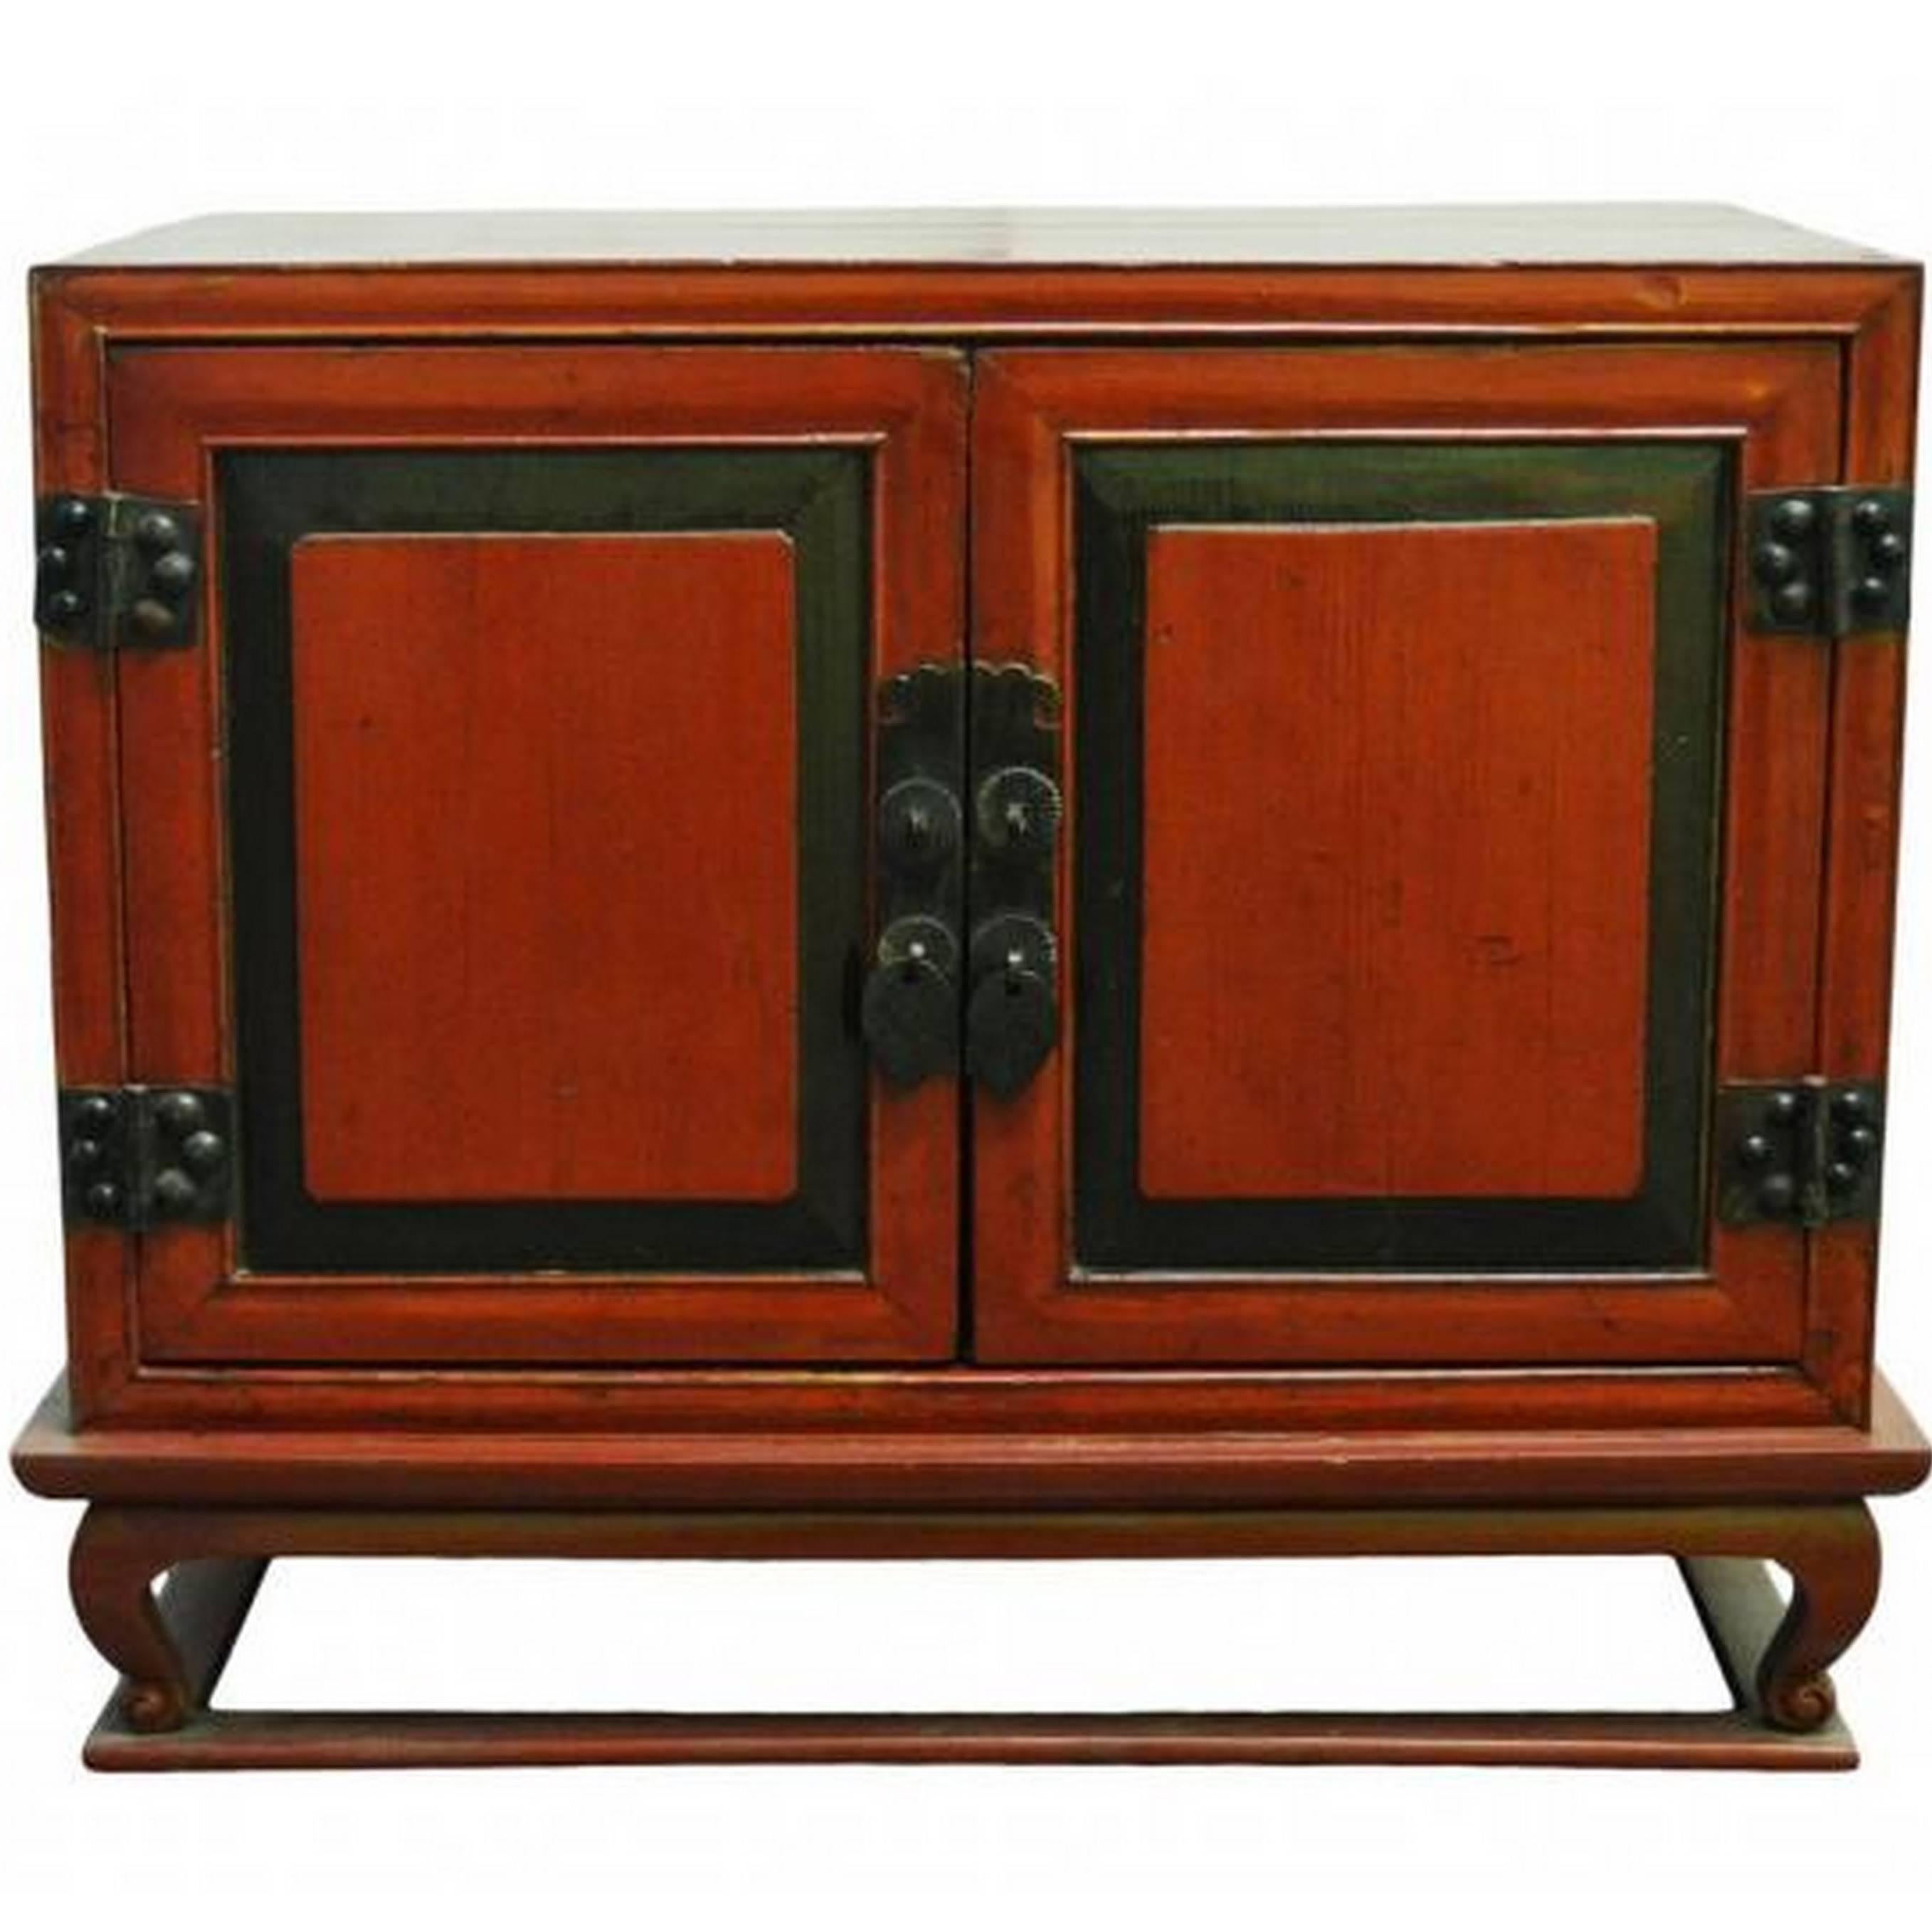 Antique Red Lacquer Bedside Cabinet with Hardware from Mid 19th Century China For Sale